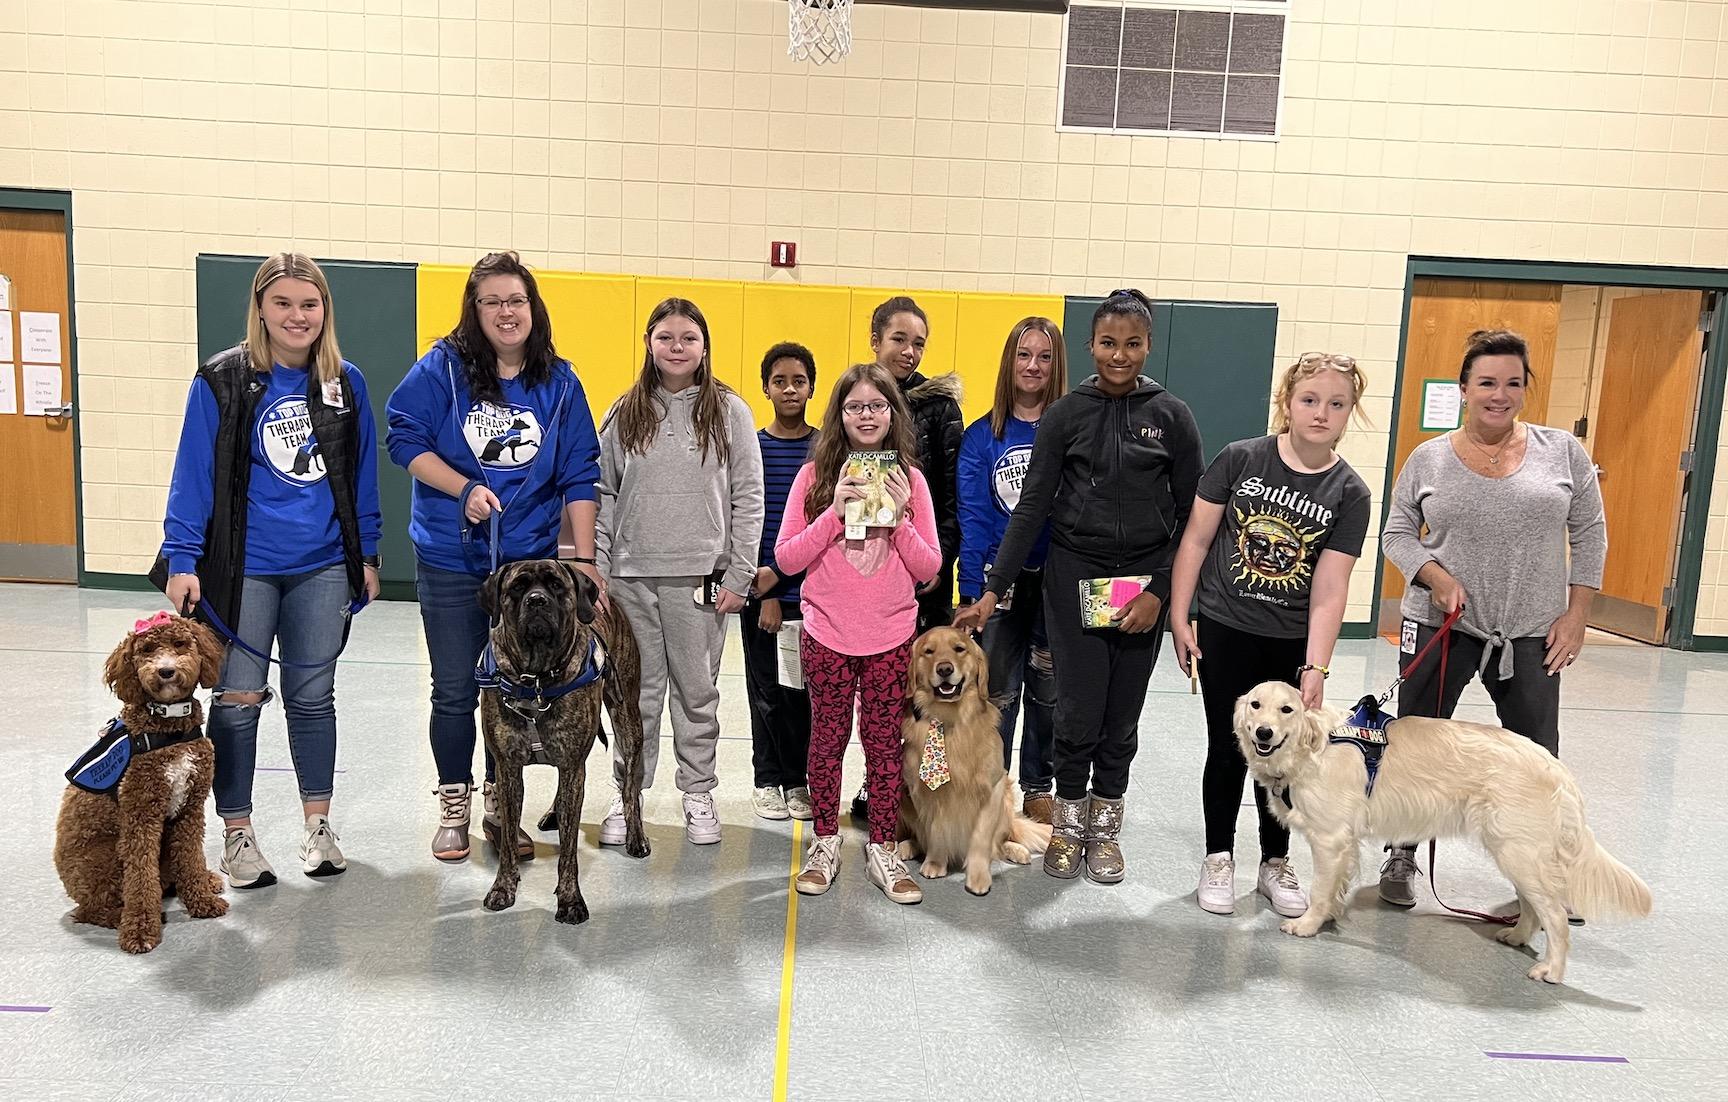 Some of the 4th and 5th-grade students join the dogs and their handlers during the visit